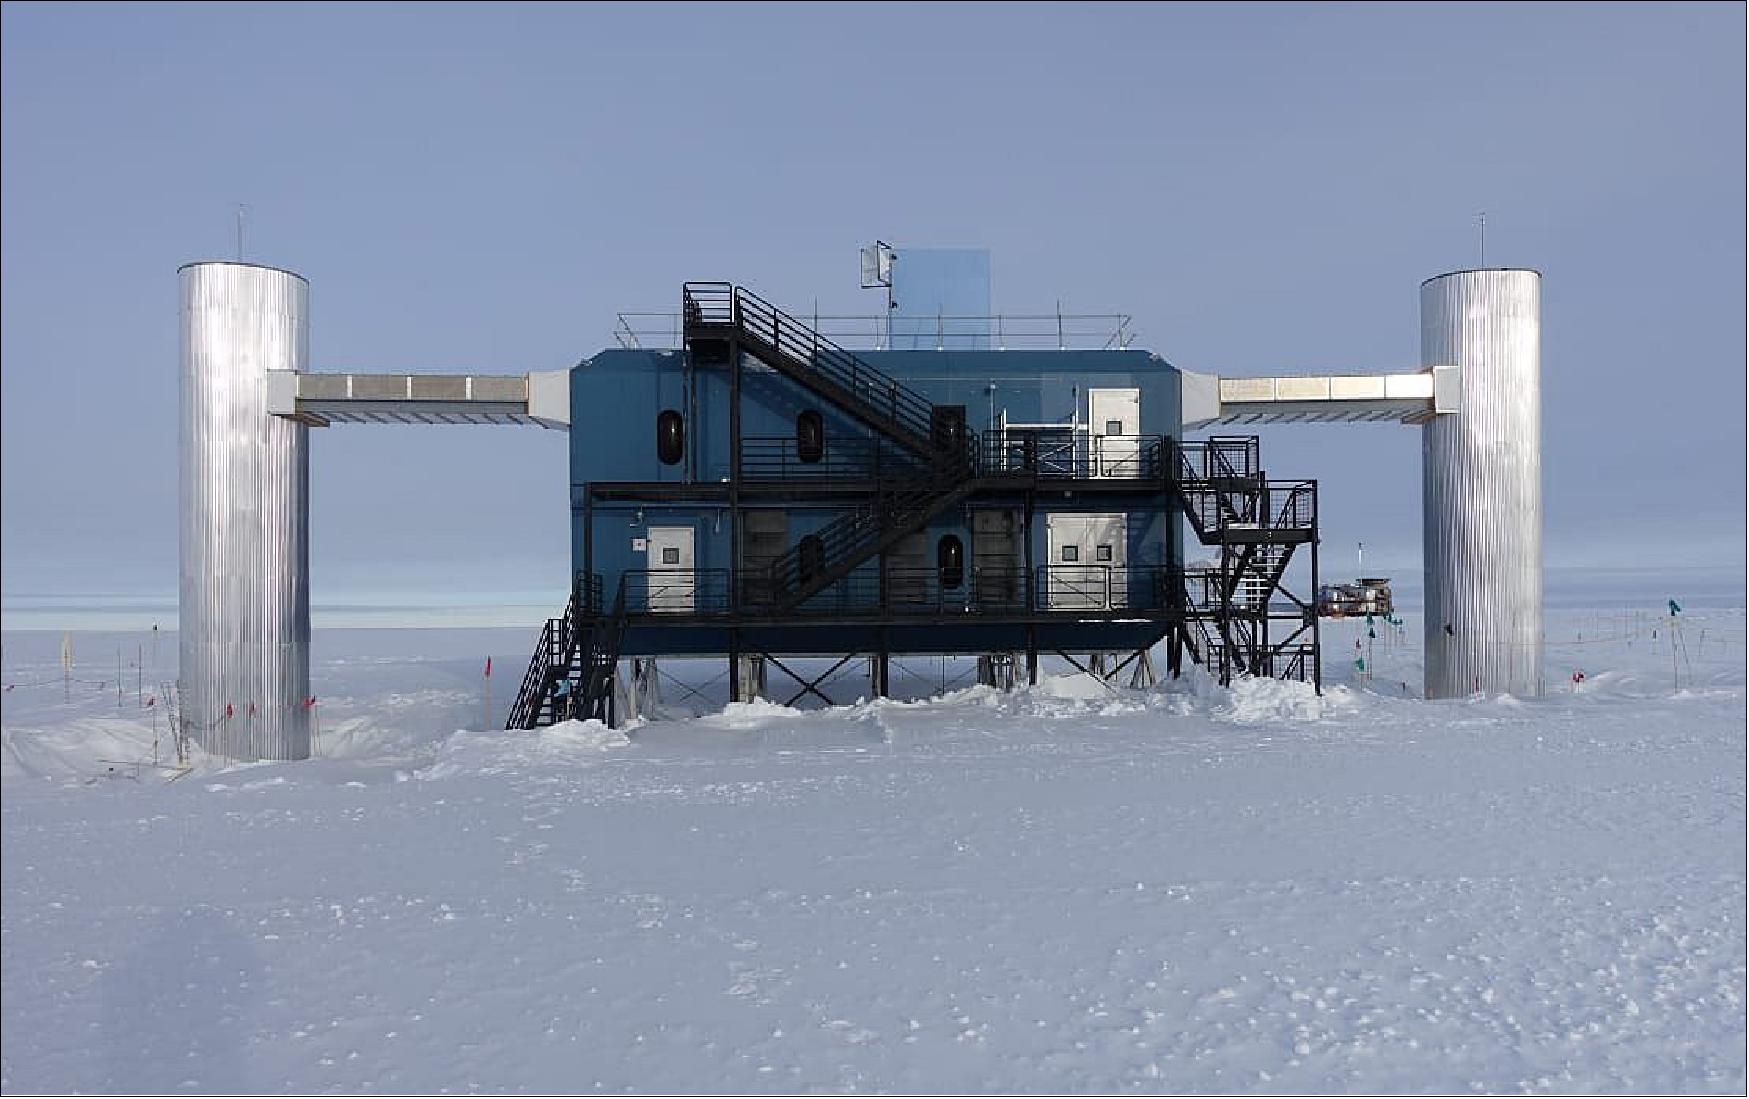 Figure 11: The IceCube Laboratory at the South Pole. This building holds the computer servers that collect data from IceCube’s sensors under the ice (image credit: John Hardin, IceCube/NSF)